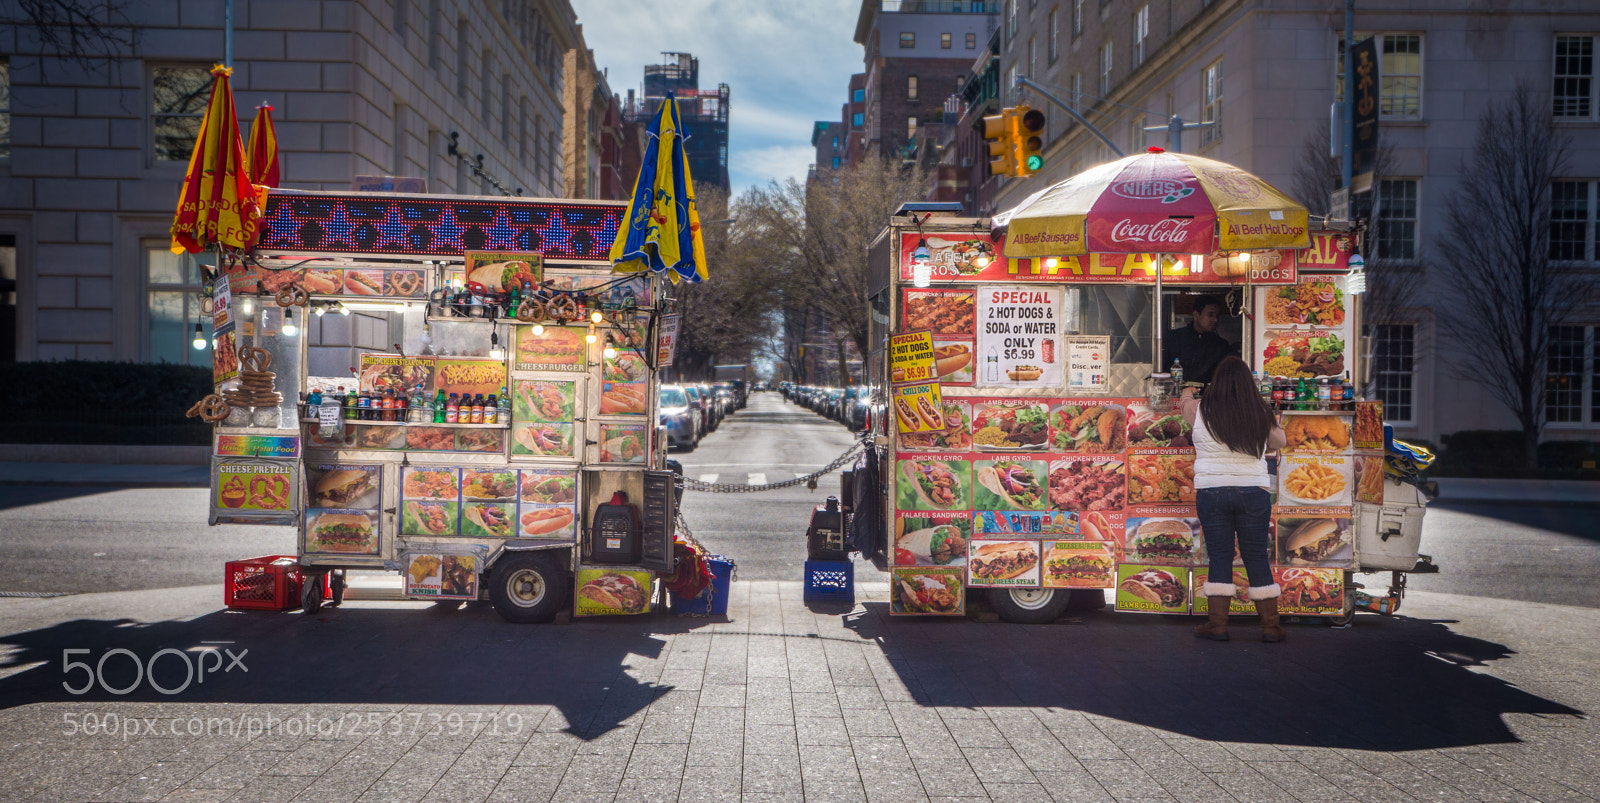 Sony a6500 sample photo. Hot-dog symetry photography